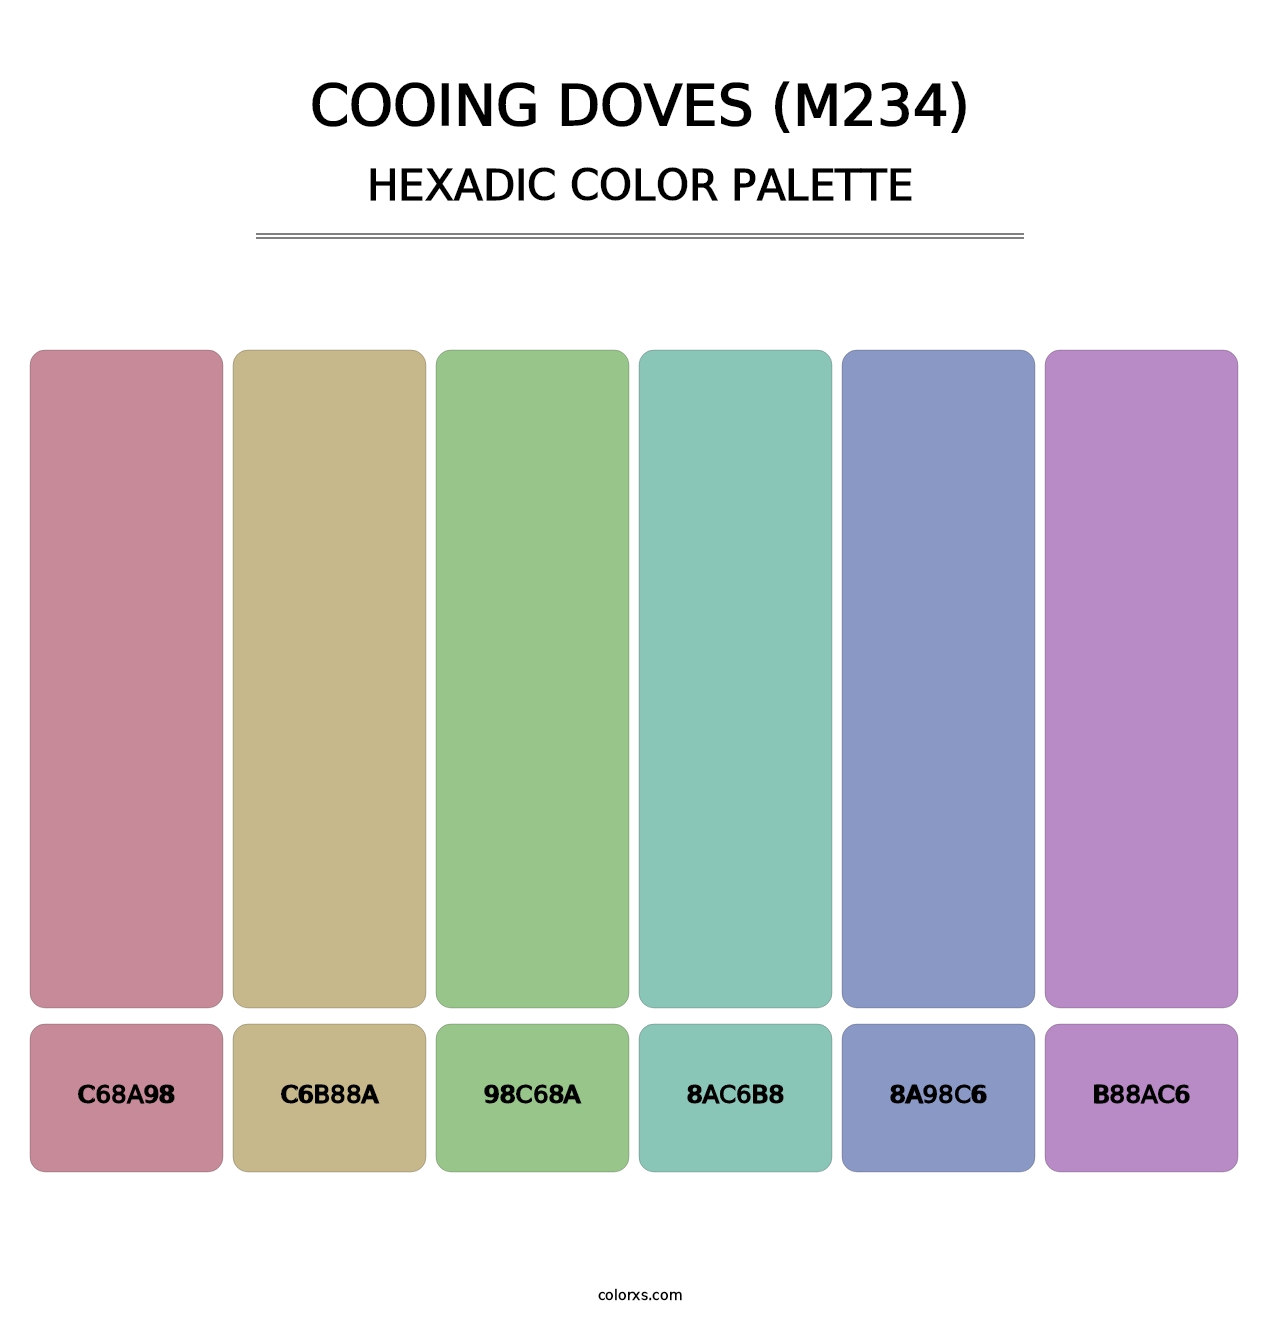 Cooing Doves (M234) - Hexadic Color Palette